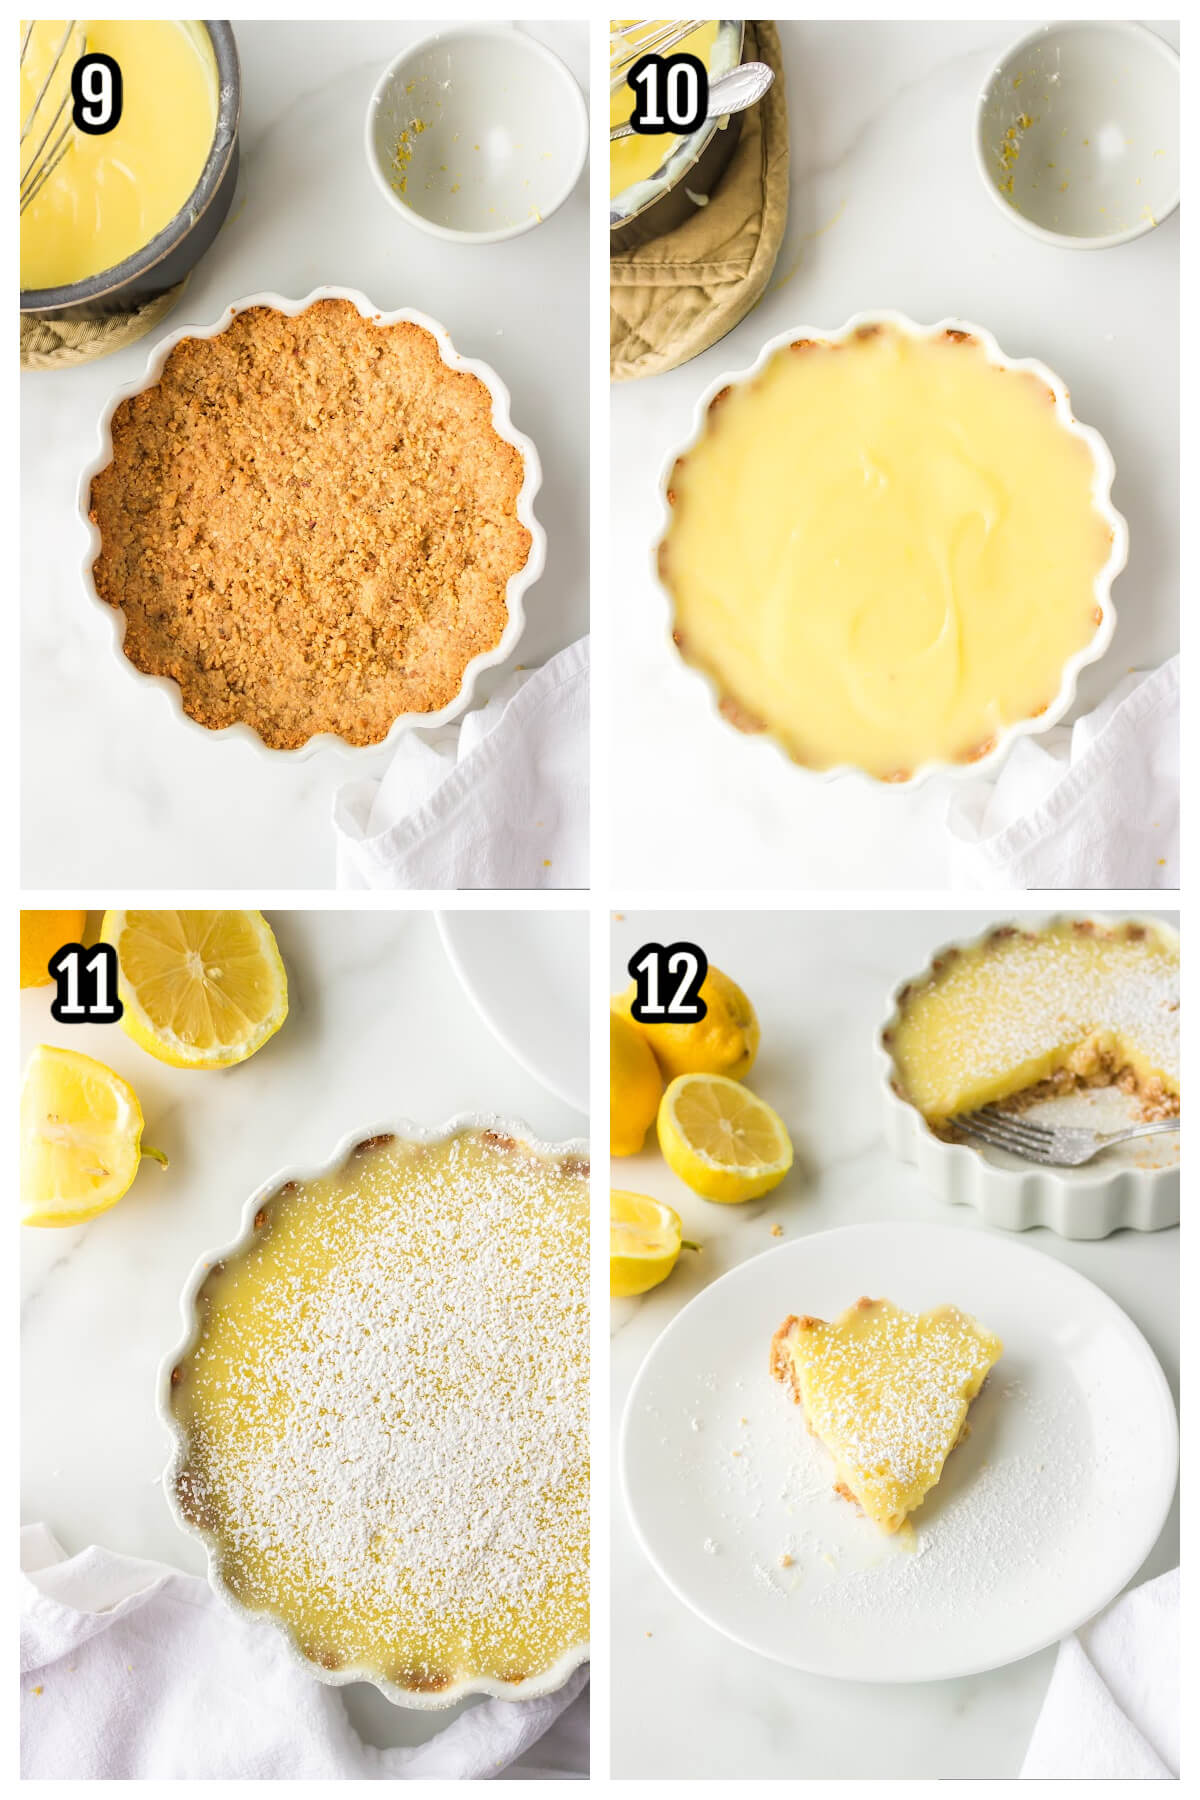 Third set of steps for making the lemon tart with biscotti crust.